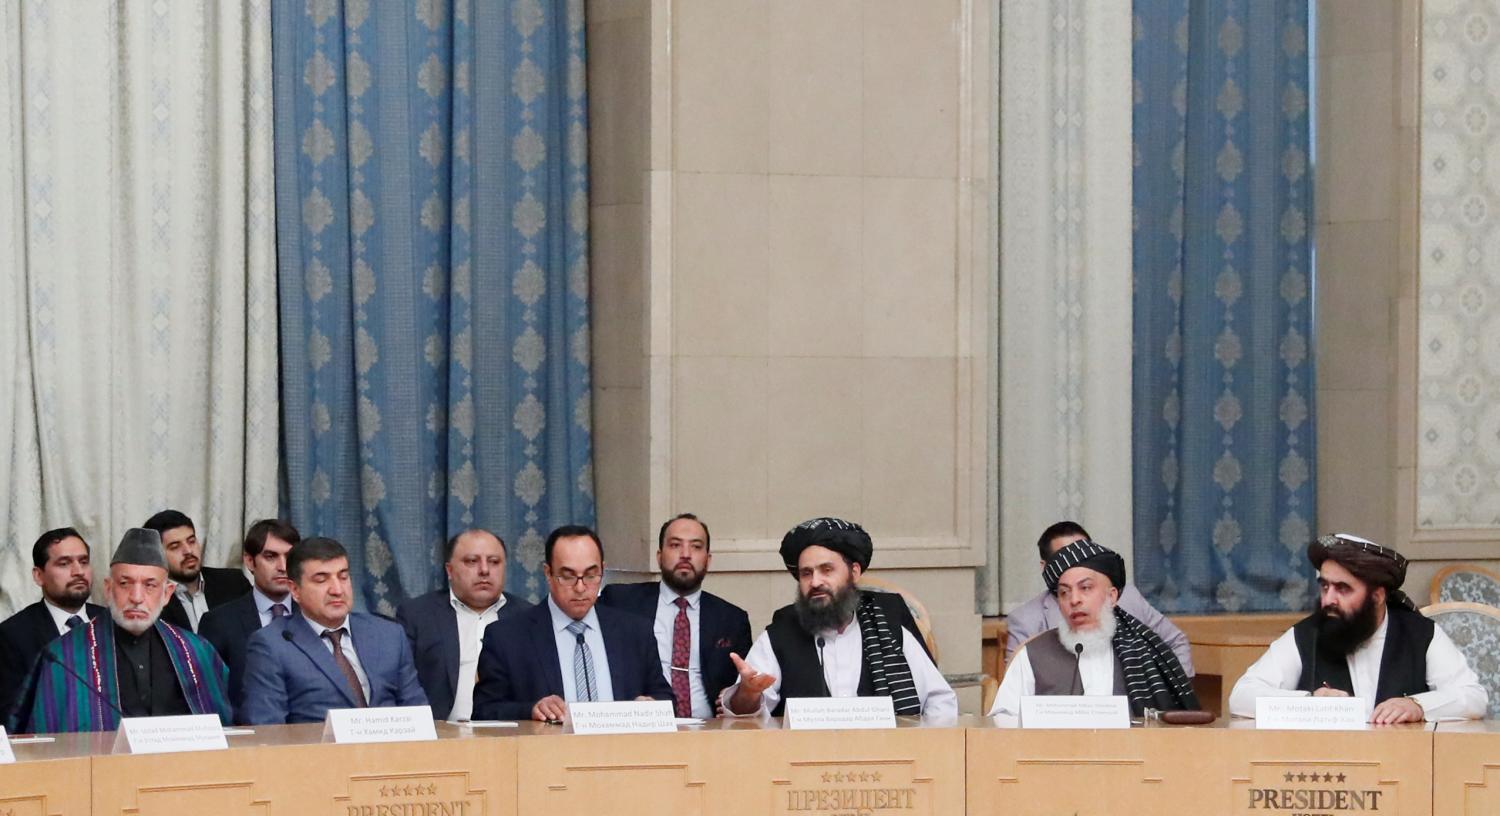 Officials, including Afghan former President Hamid Karzai (L), Head of Political Office of Taliban Mohammad Abbas Stanikzai (2nd R) and Taliban chief negotiator Mullah Abdul Ghani Baradar (3rd R), attend peace talks in Moscow, Russia May 30, 2019. REUTERS/Evgenia Novozhenina